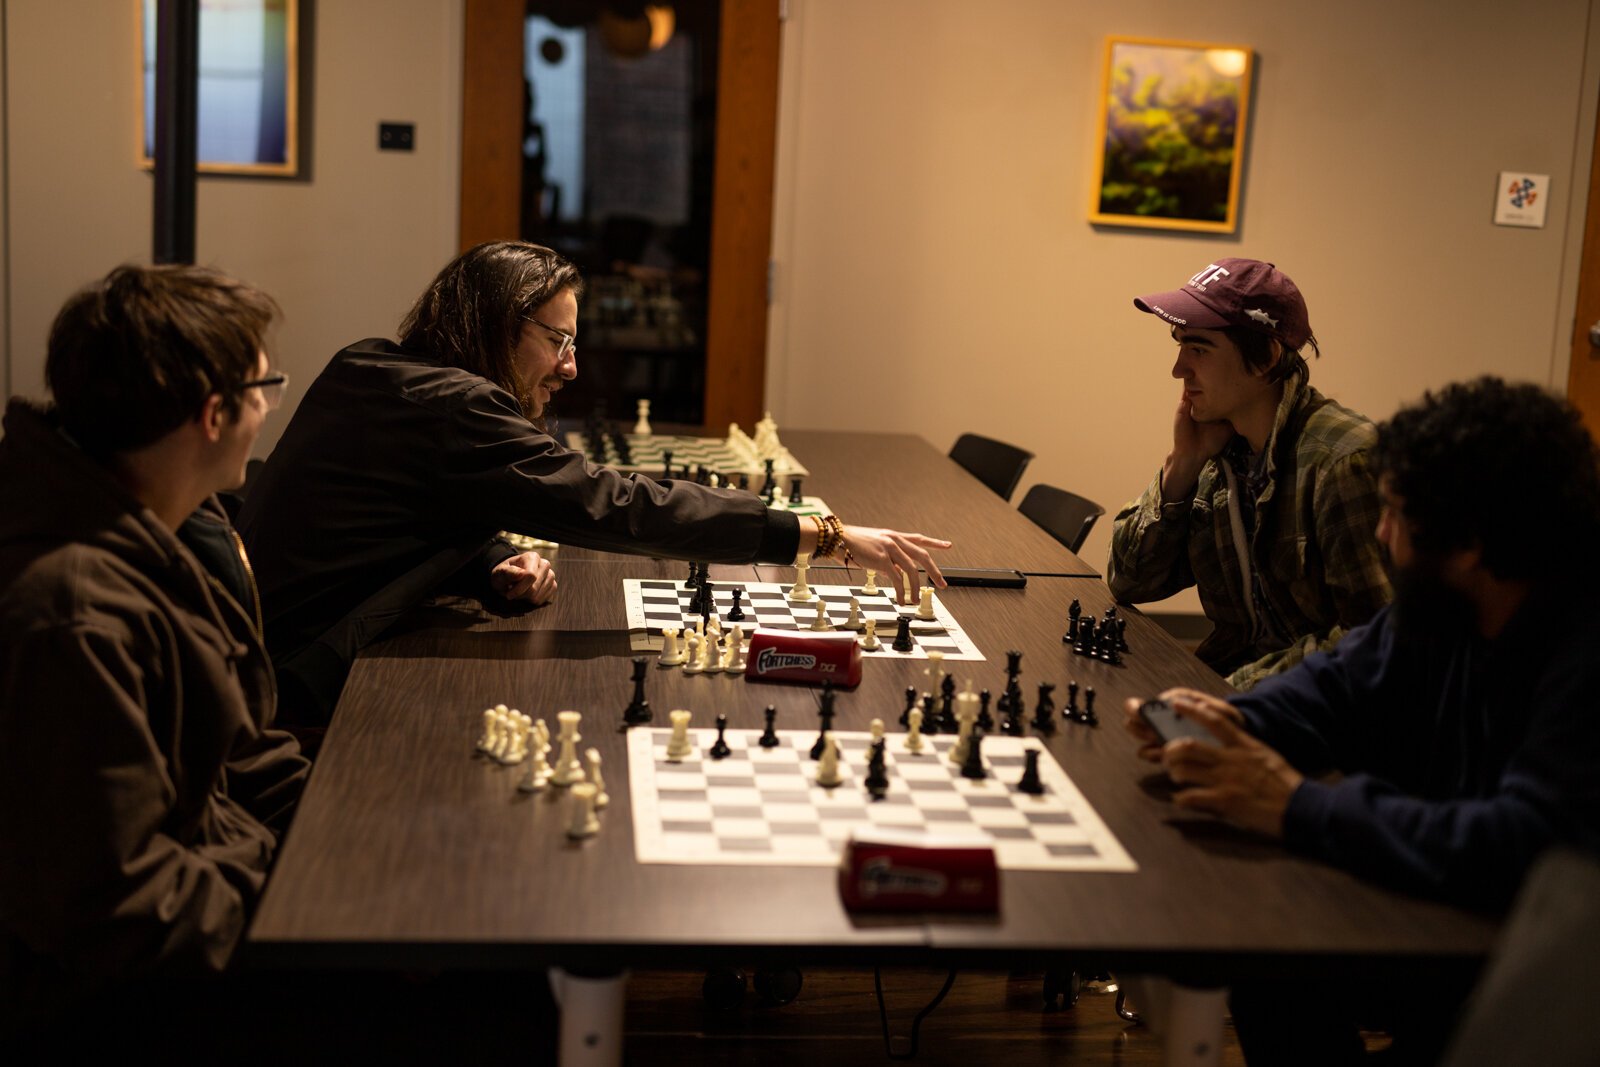 Chess meets in Fort Wayne are building community bonds during pandemic times.